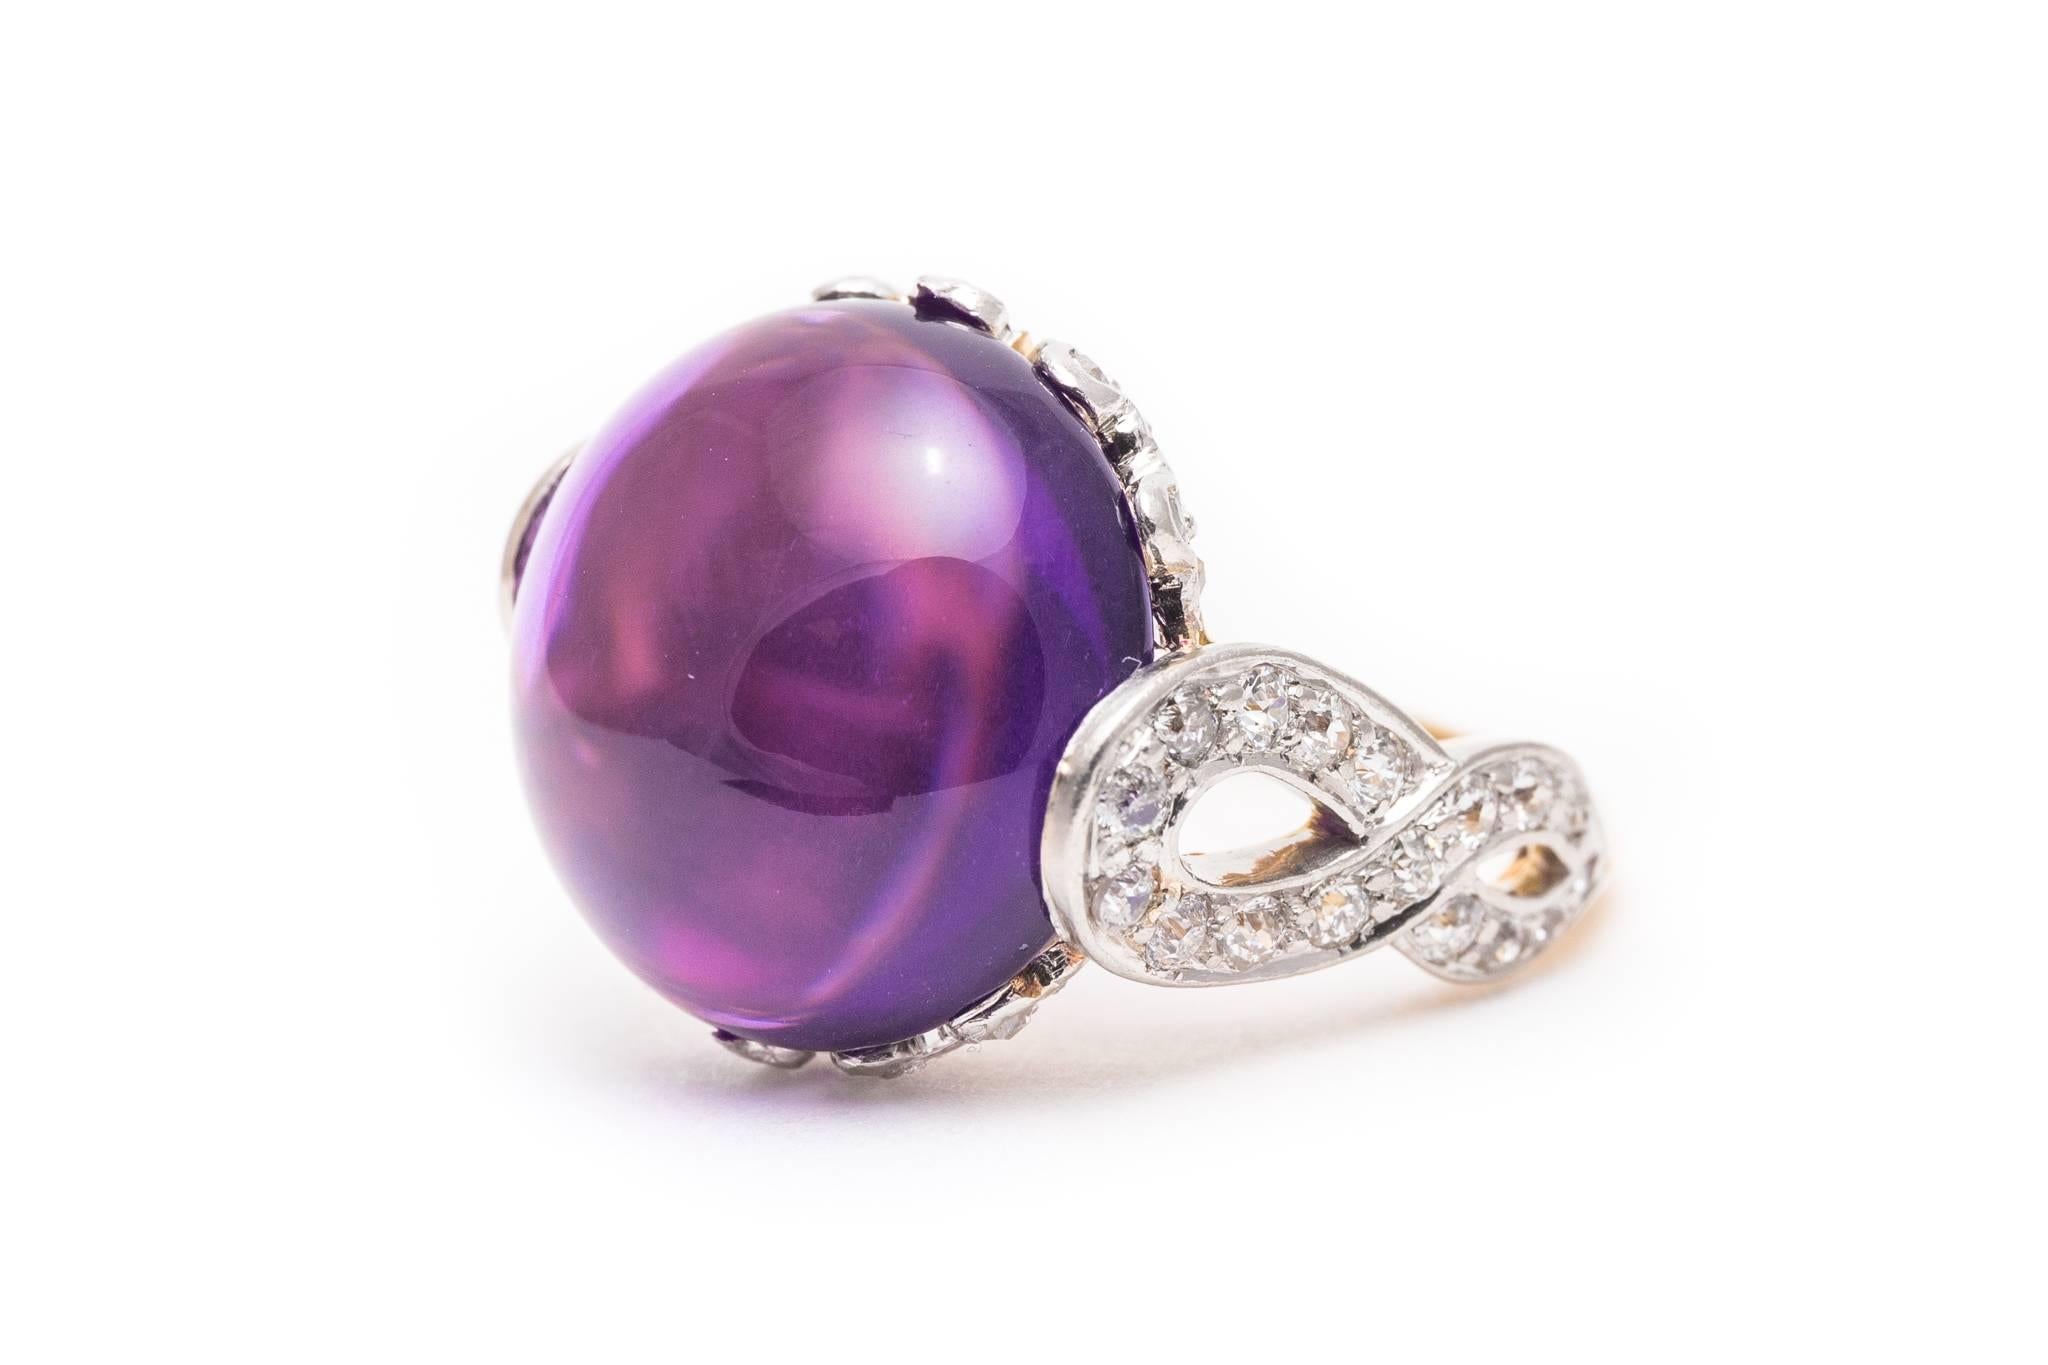 Beacon Hill Jewelers Presents:

A beautiful edwardian period amethyst, and diamond ring in platinum and 18 karat yellow gold. Made by the famous jeweler Black Star and Frost, this ring features a large cabochon cut amethyst set in a crown of